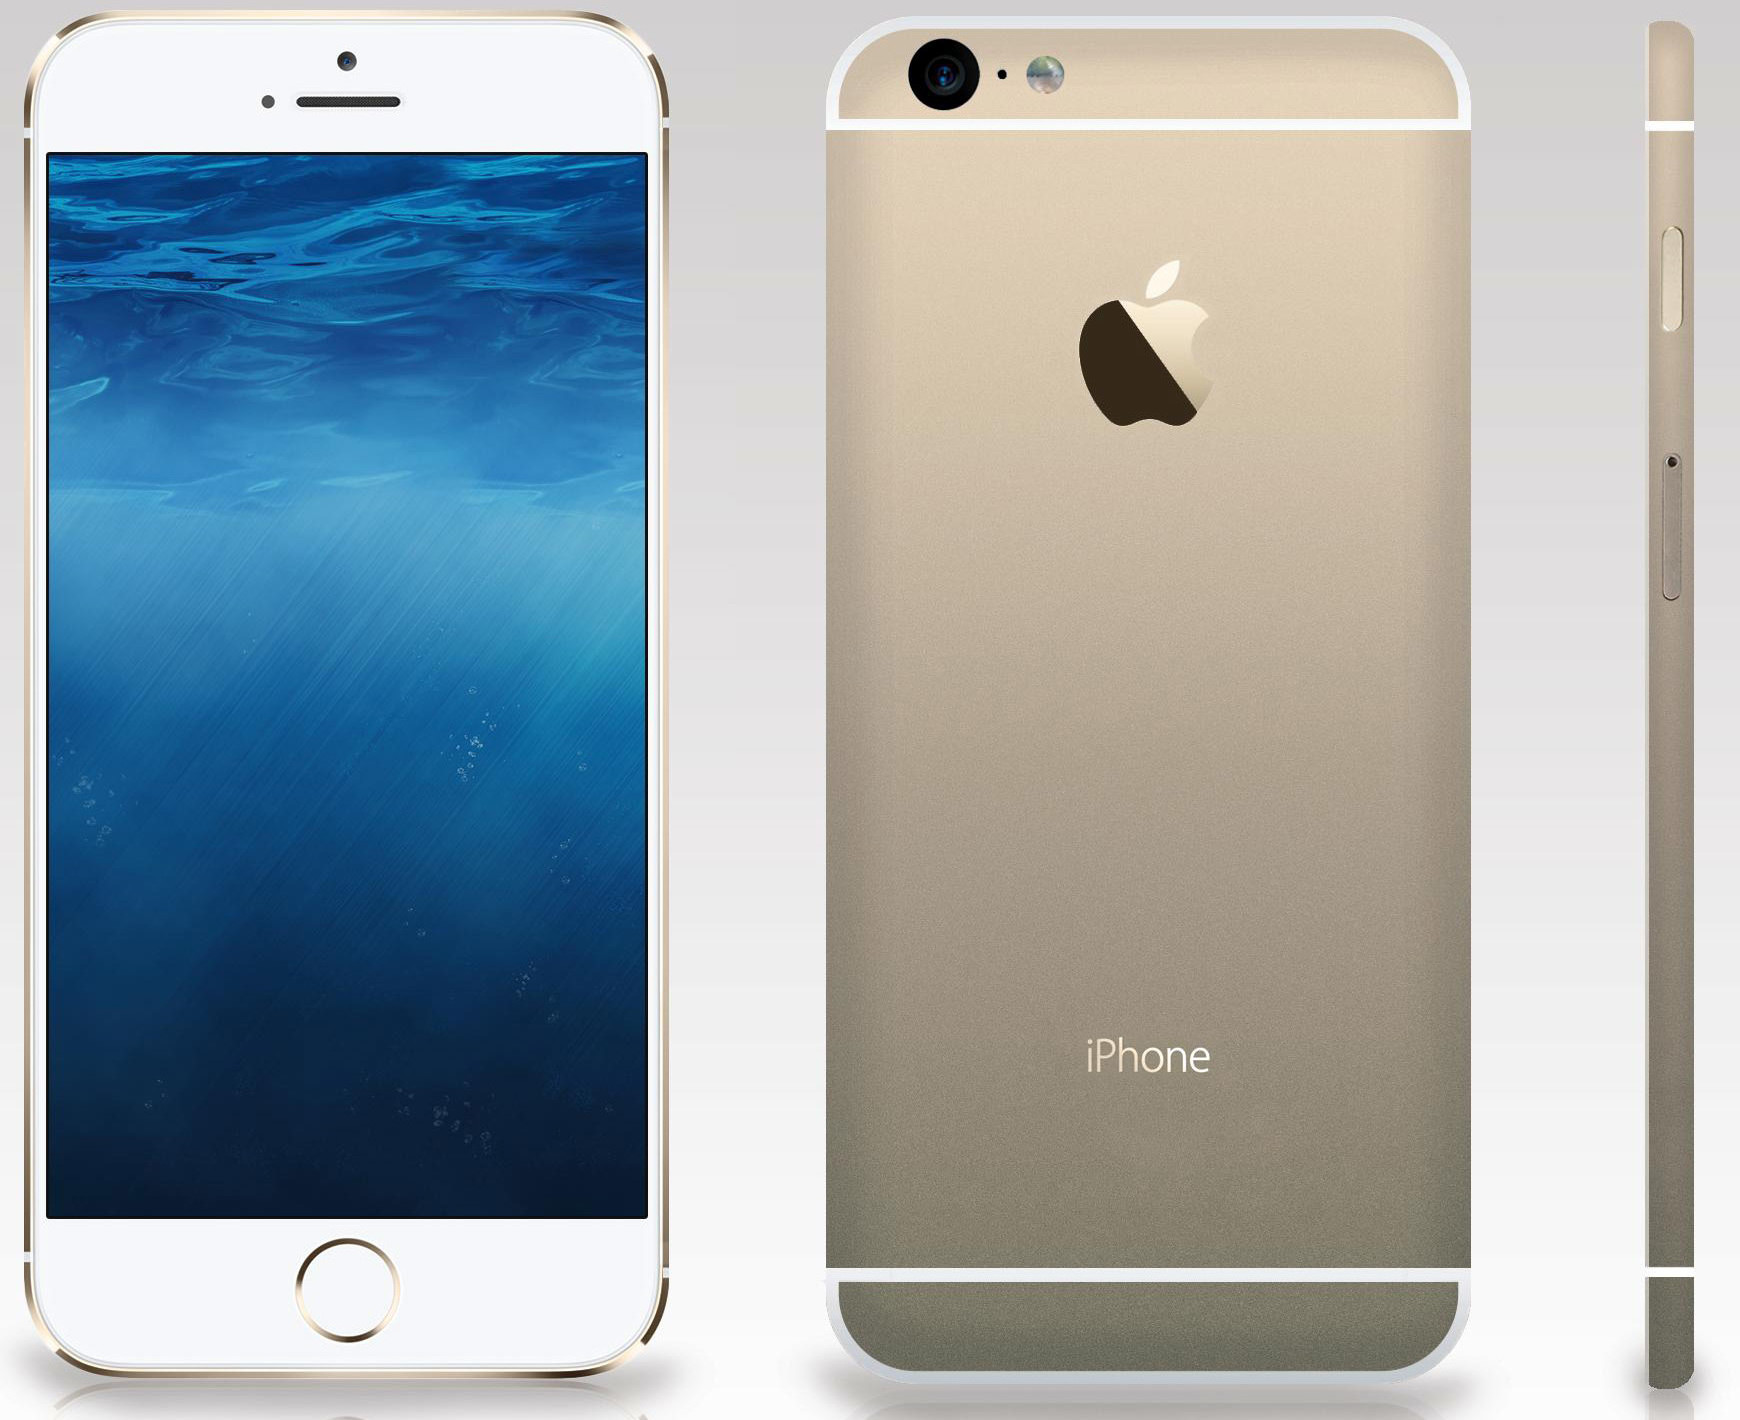 Apple iPhone 6 A1549 (CDMA) 128GB - Specs and Price - Phonegg